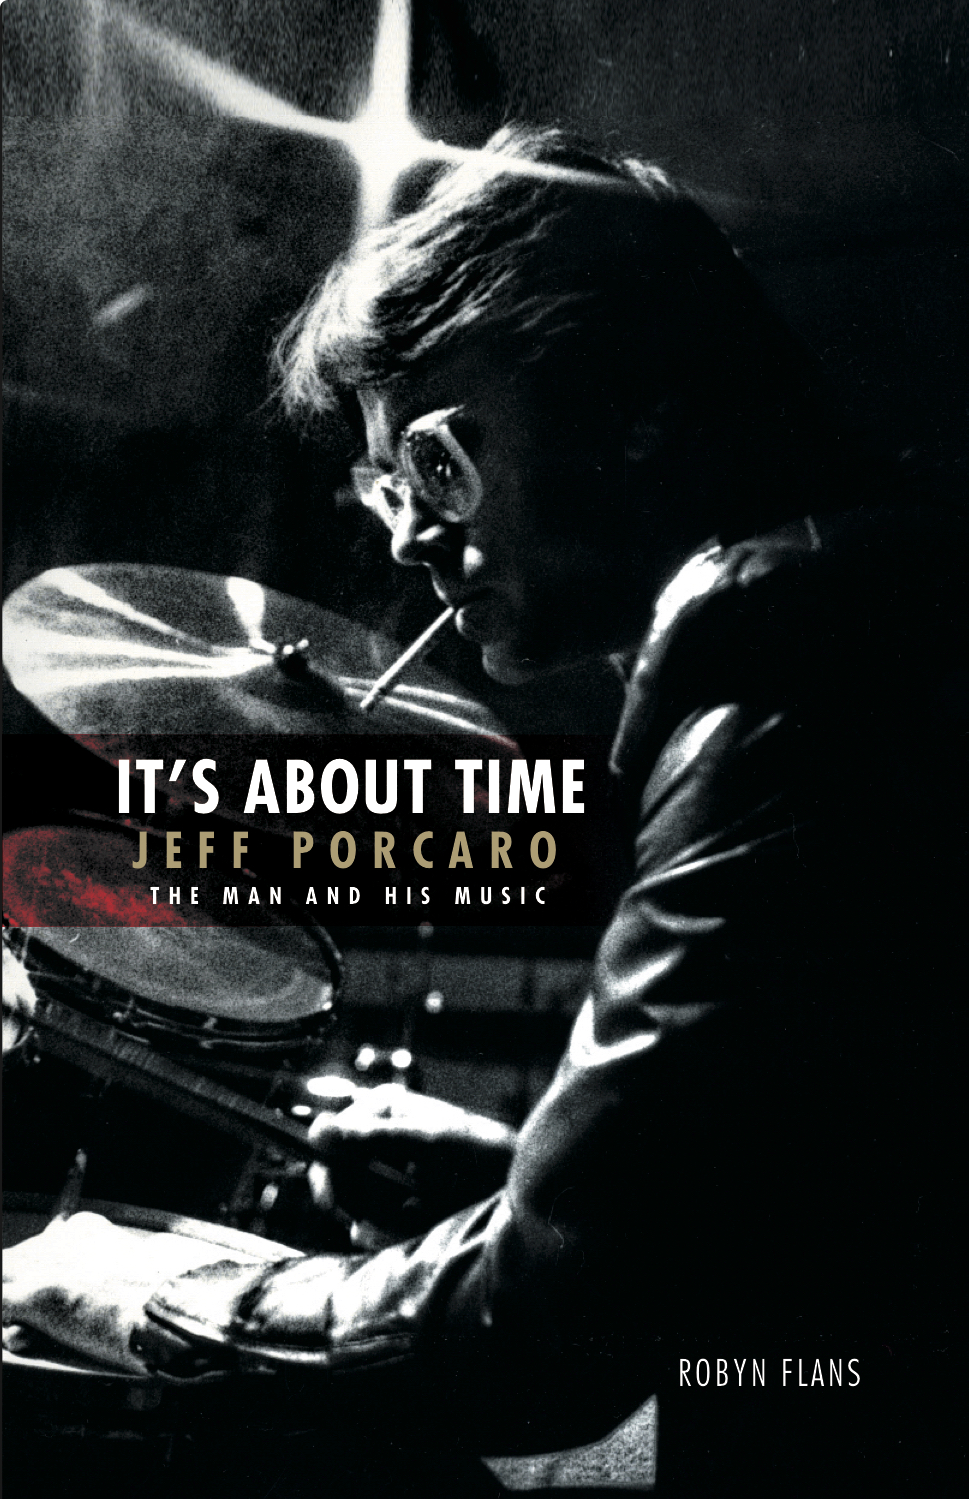 It's About Time Jeff Porcaro: Reference Books: History